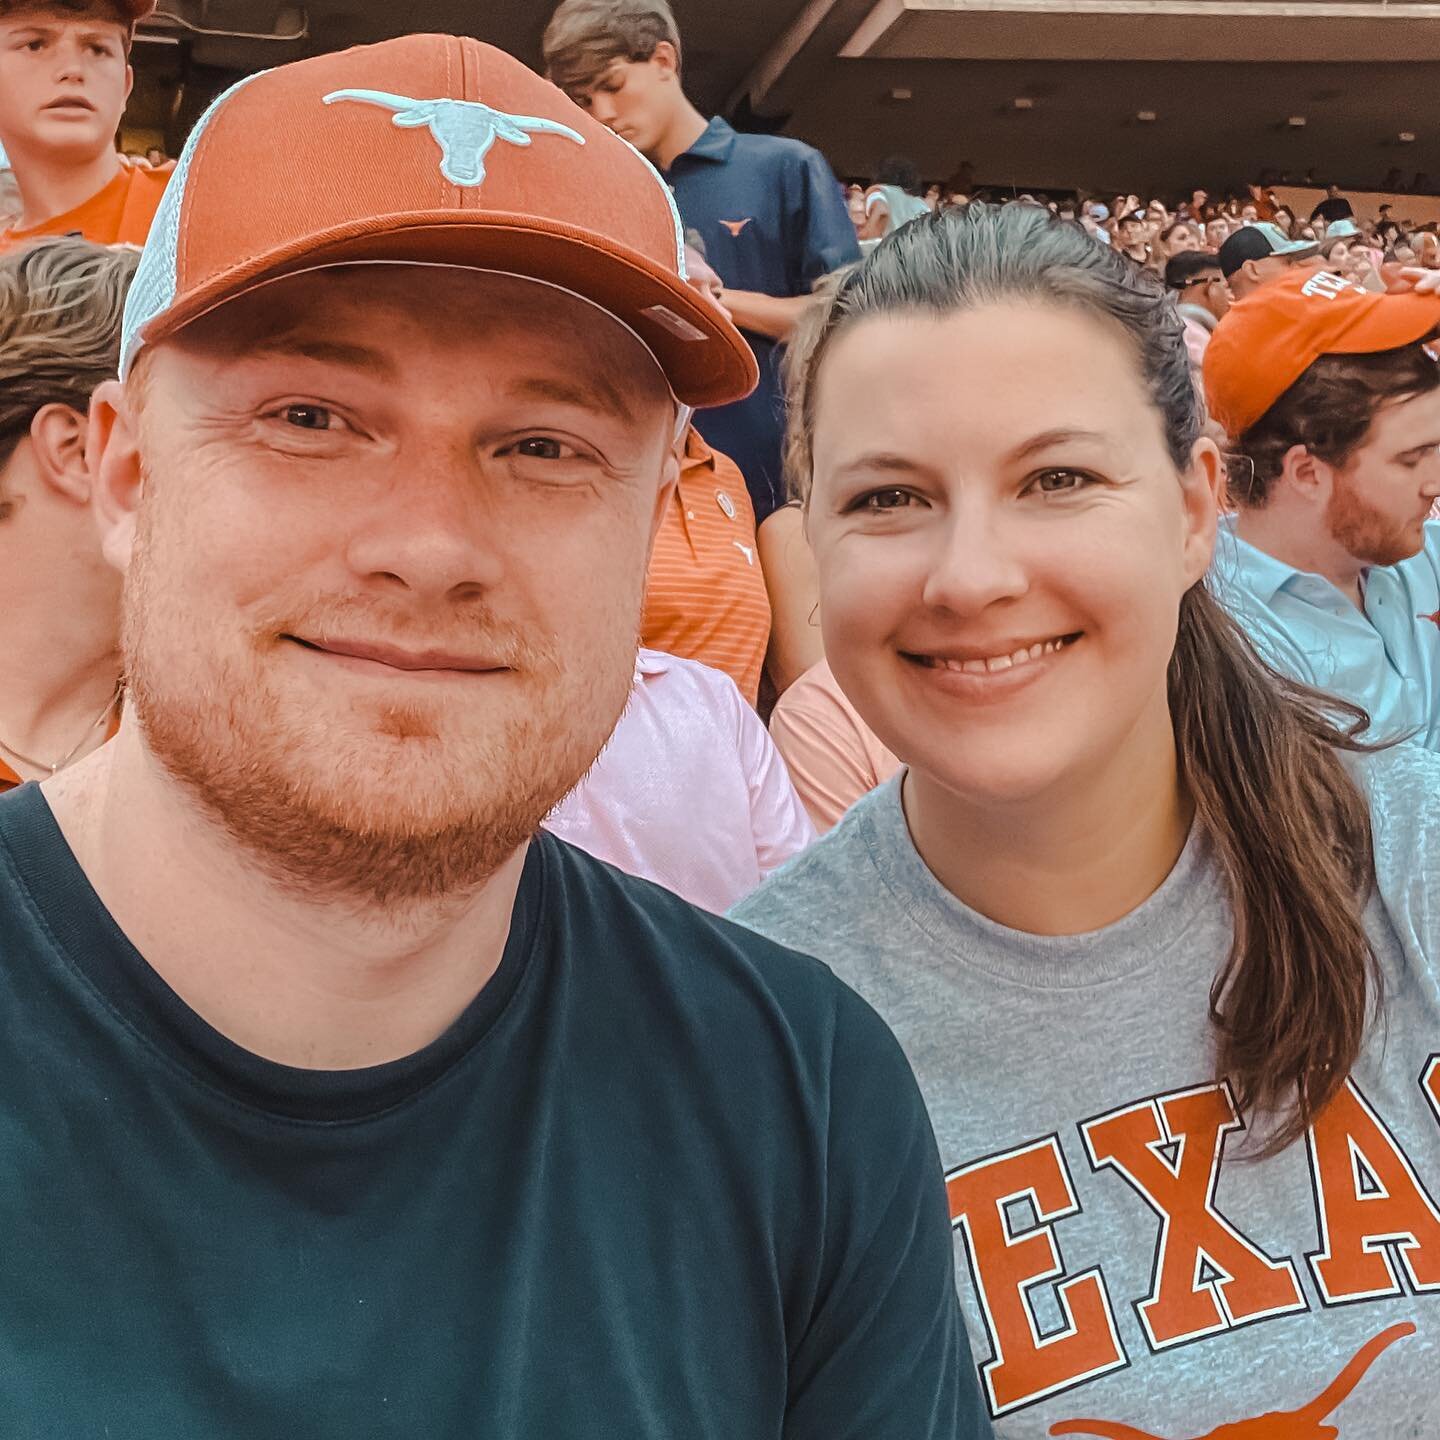 Don&rsquo;t know what happened - I just blinked. Next thing I know I&rsquo;m in DKR stadium wearing a Texas t-shirt shouting &ldquo;Texas fight&rdquo; for the Longhorns&hellip; but that&rsquo;s okay because they won 52-10 against LA-Monroe and did yo